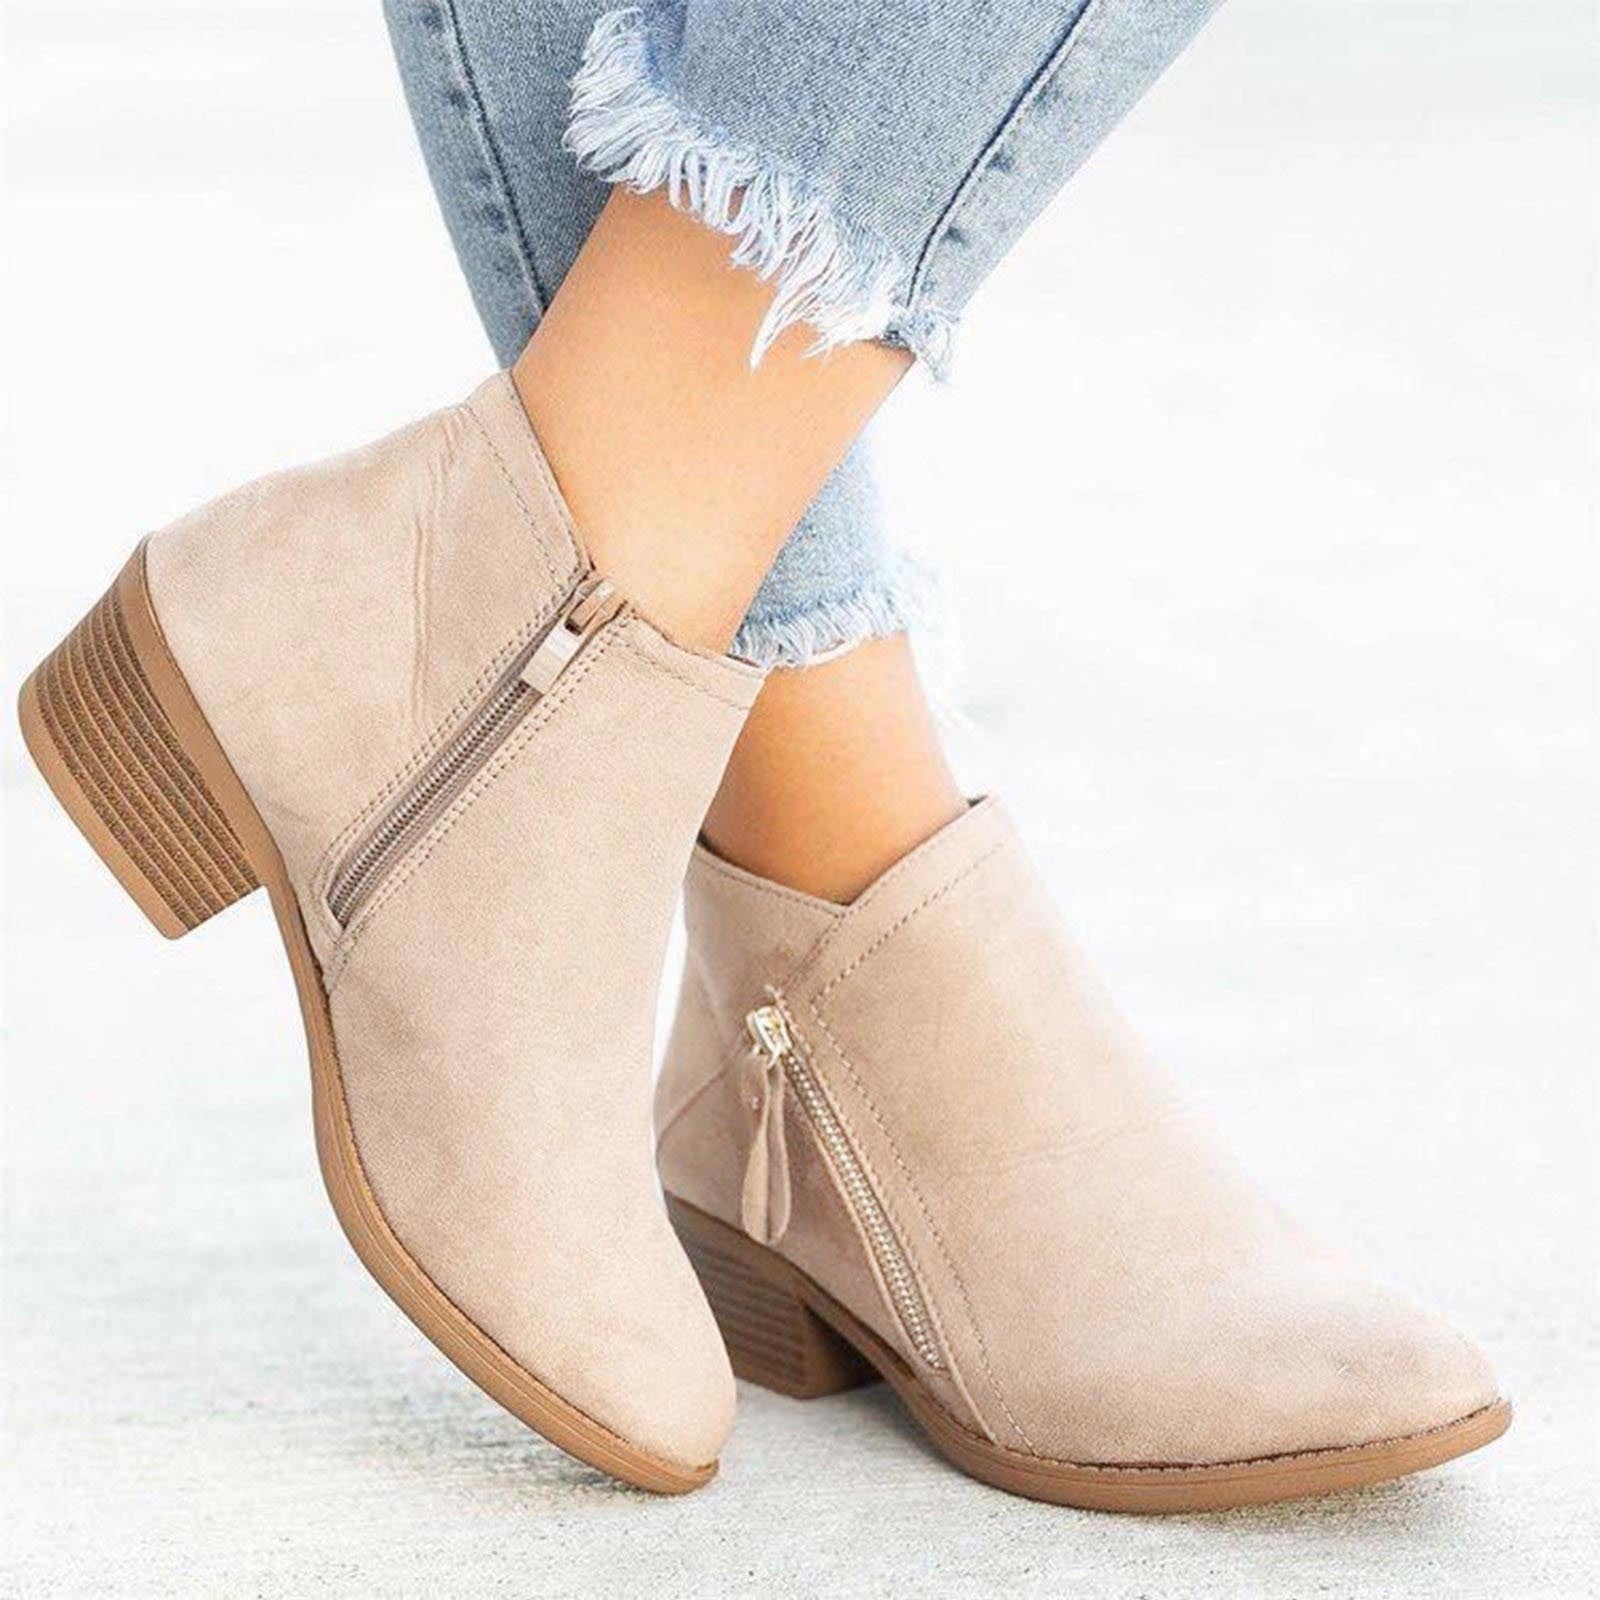 HAOTAGS Women's Suede Leather Booties Low-heeled Ankle Boots Fall Fashion  Dressy Shoes Beige Size 10.5